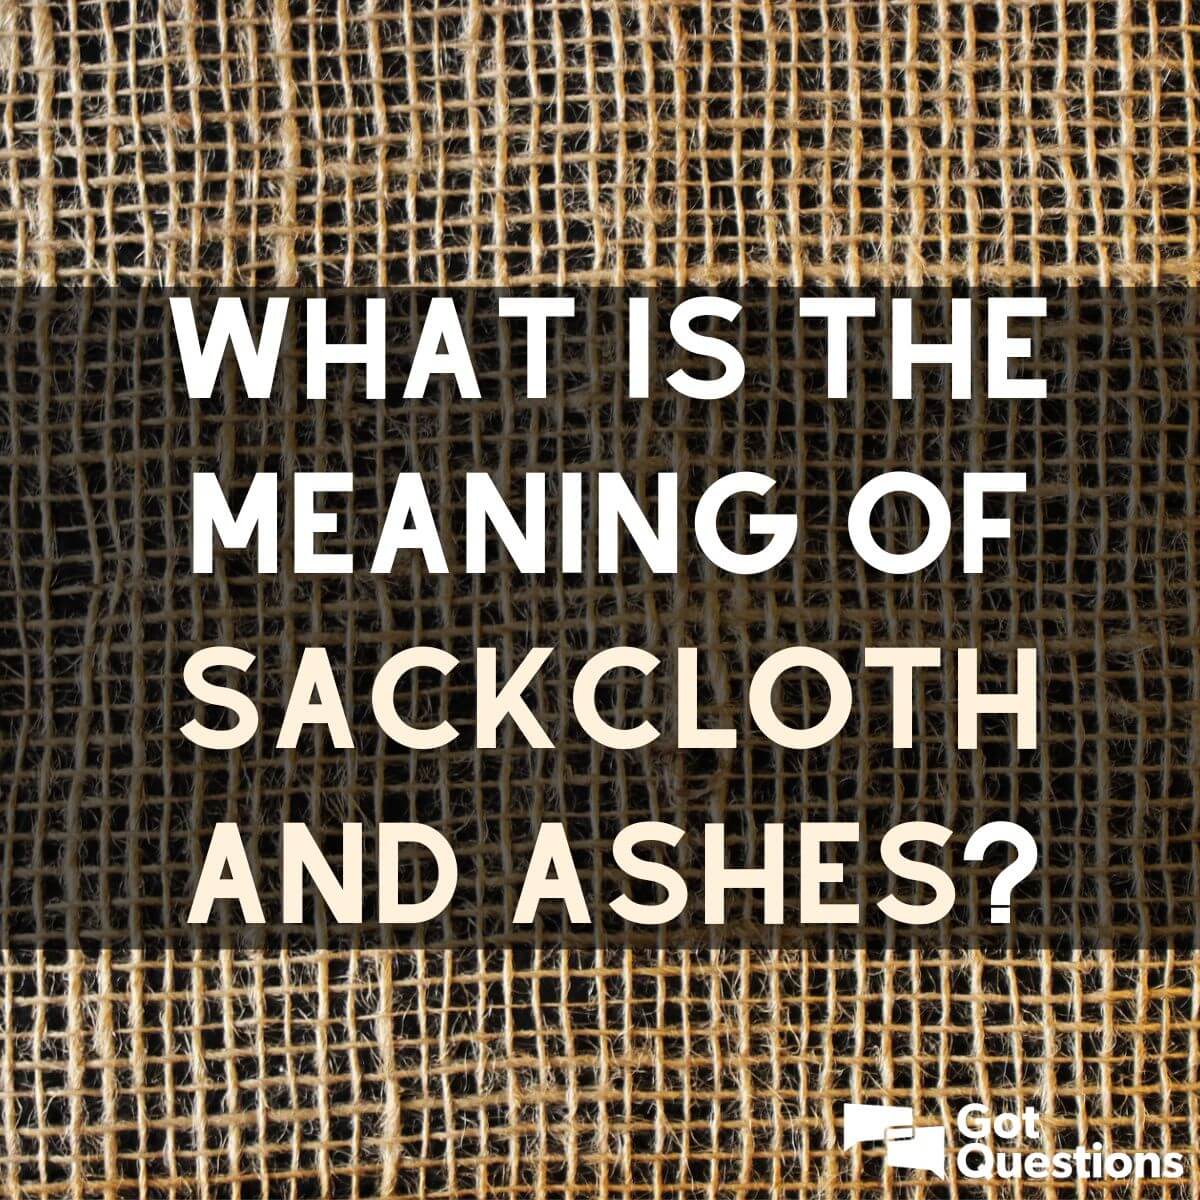 What is the meaning of sackcloth and ashes?